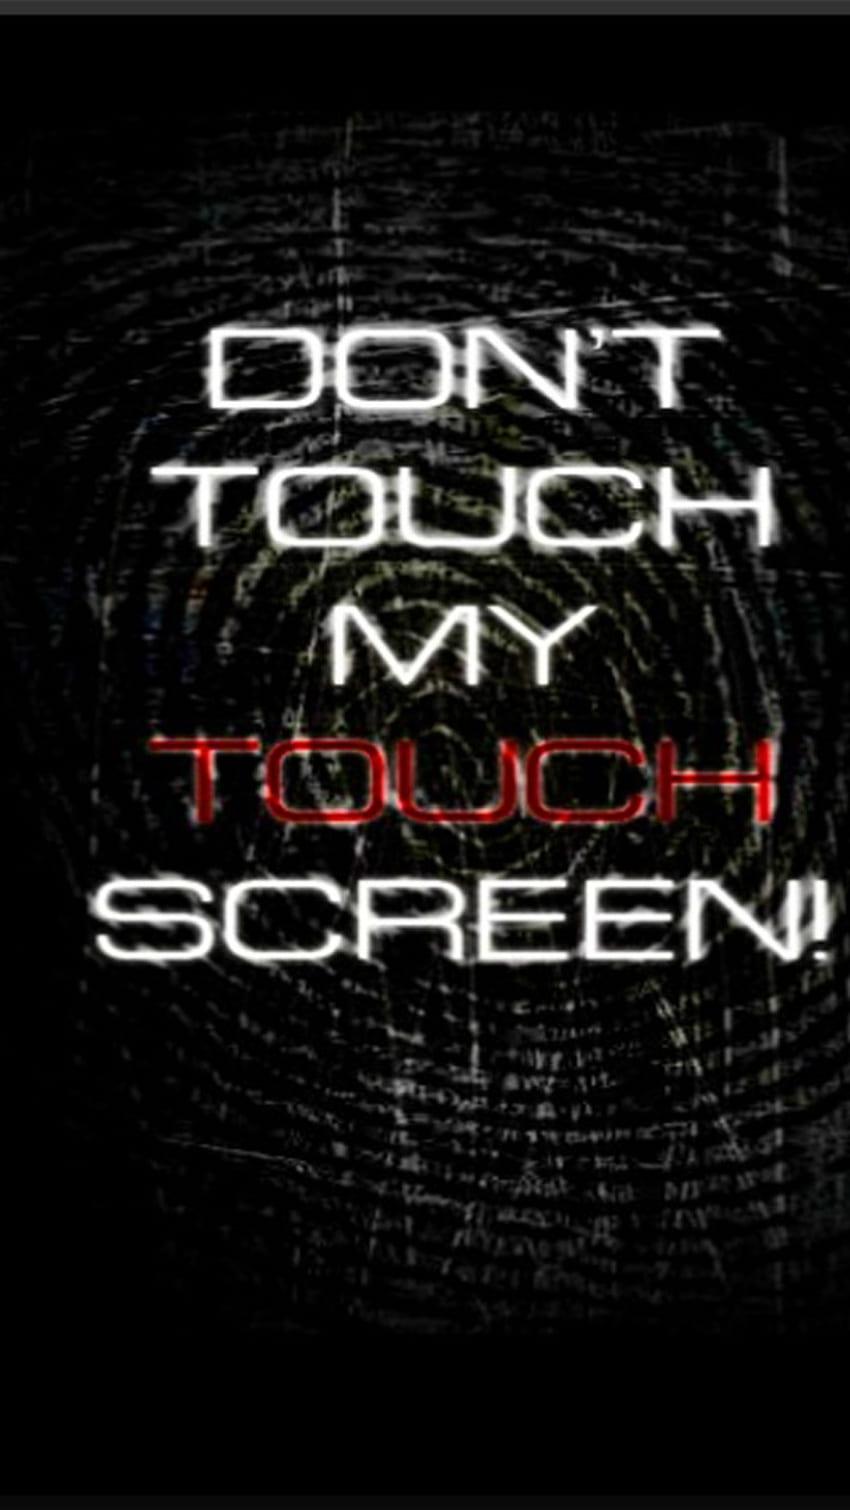 Don't Touch My Phone Live, Touch Screen, dont touch my phone live HD phone wallpaper